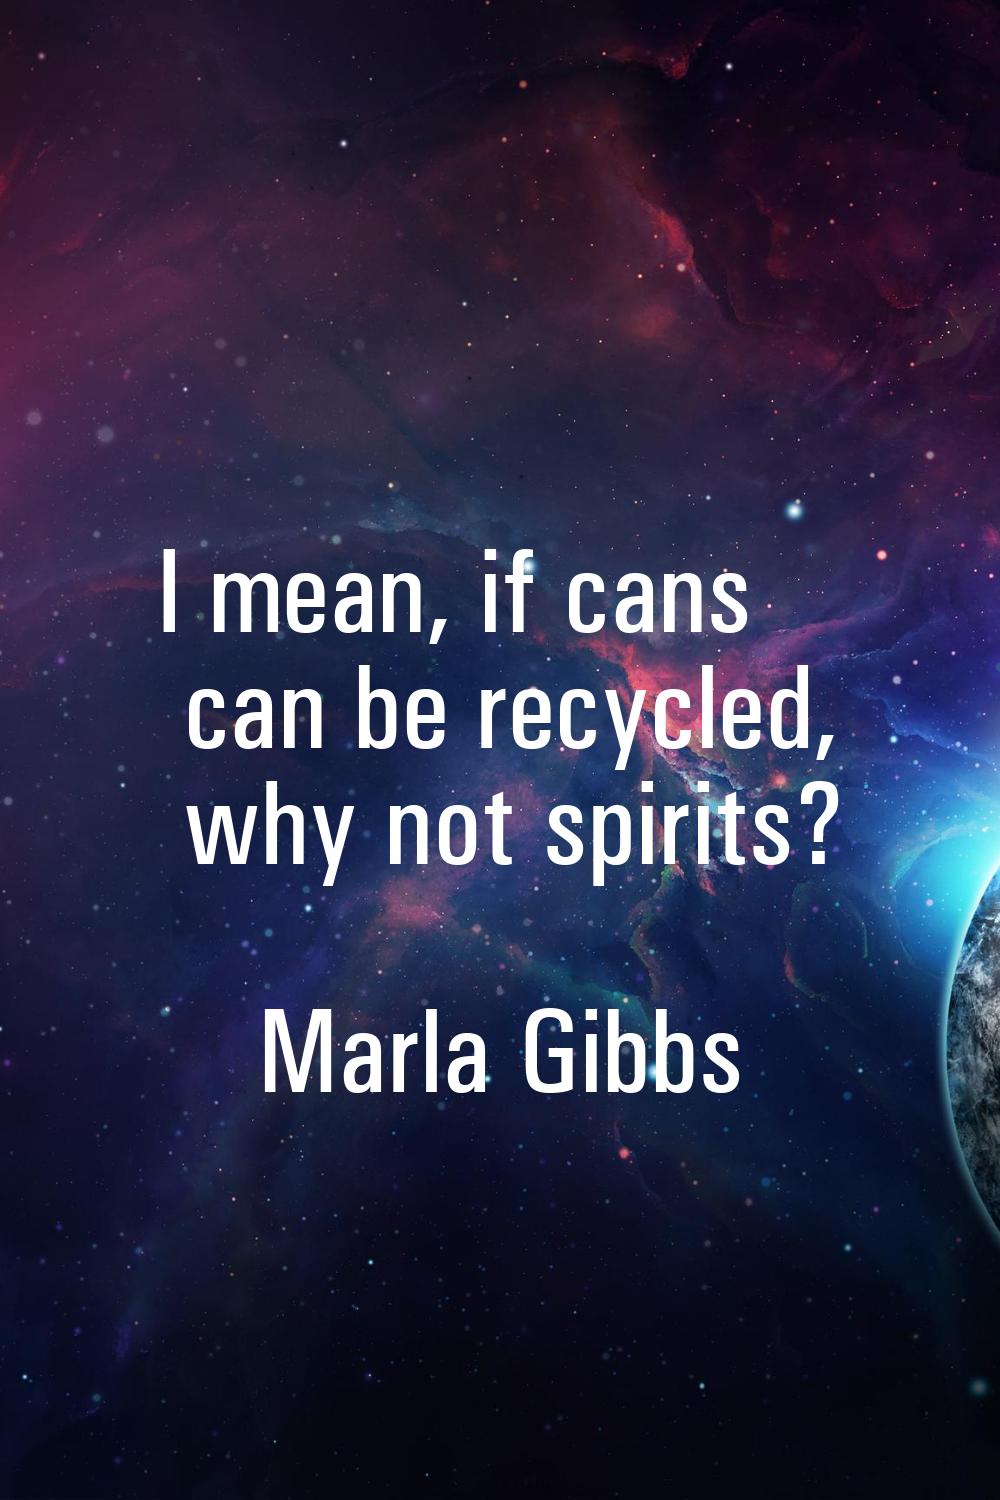 I mean, if cans can be recycled, why not spirits?